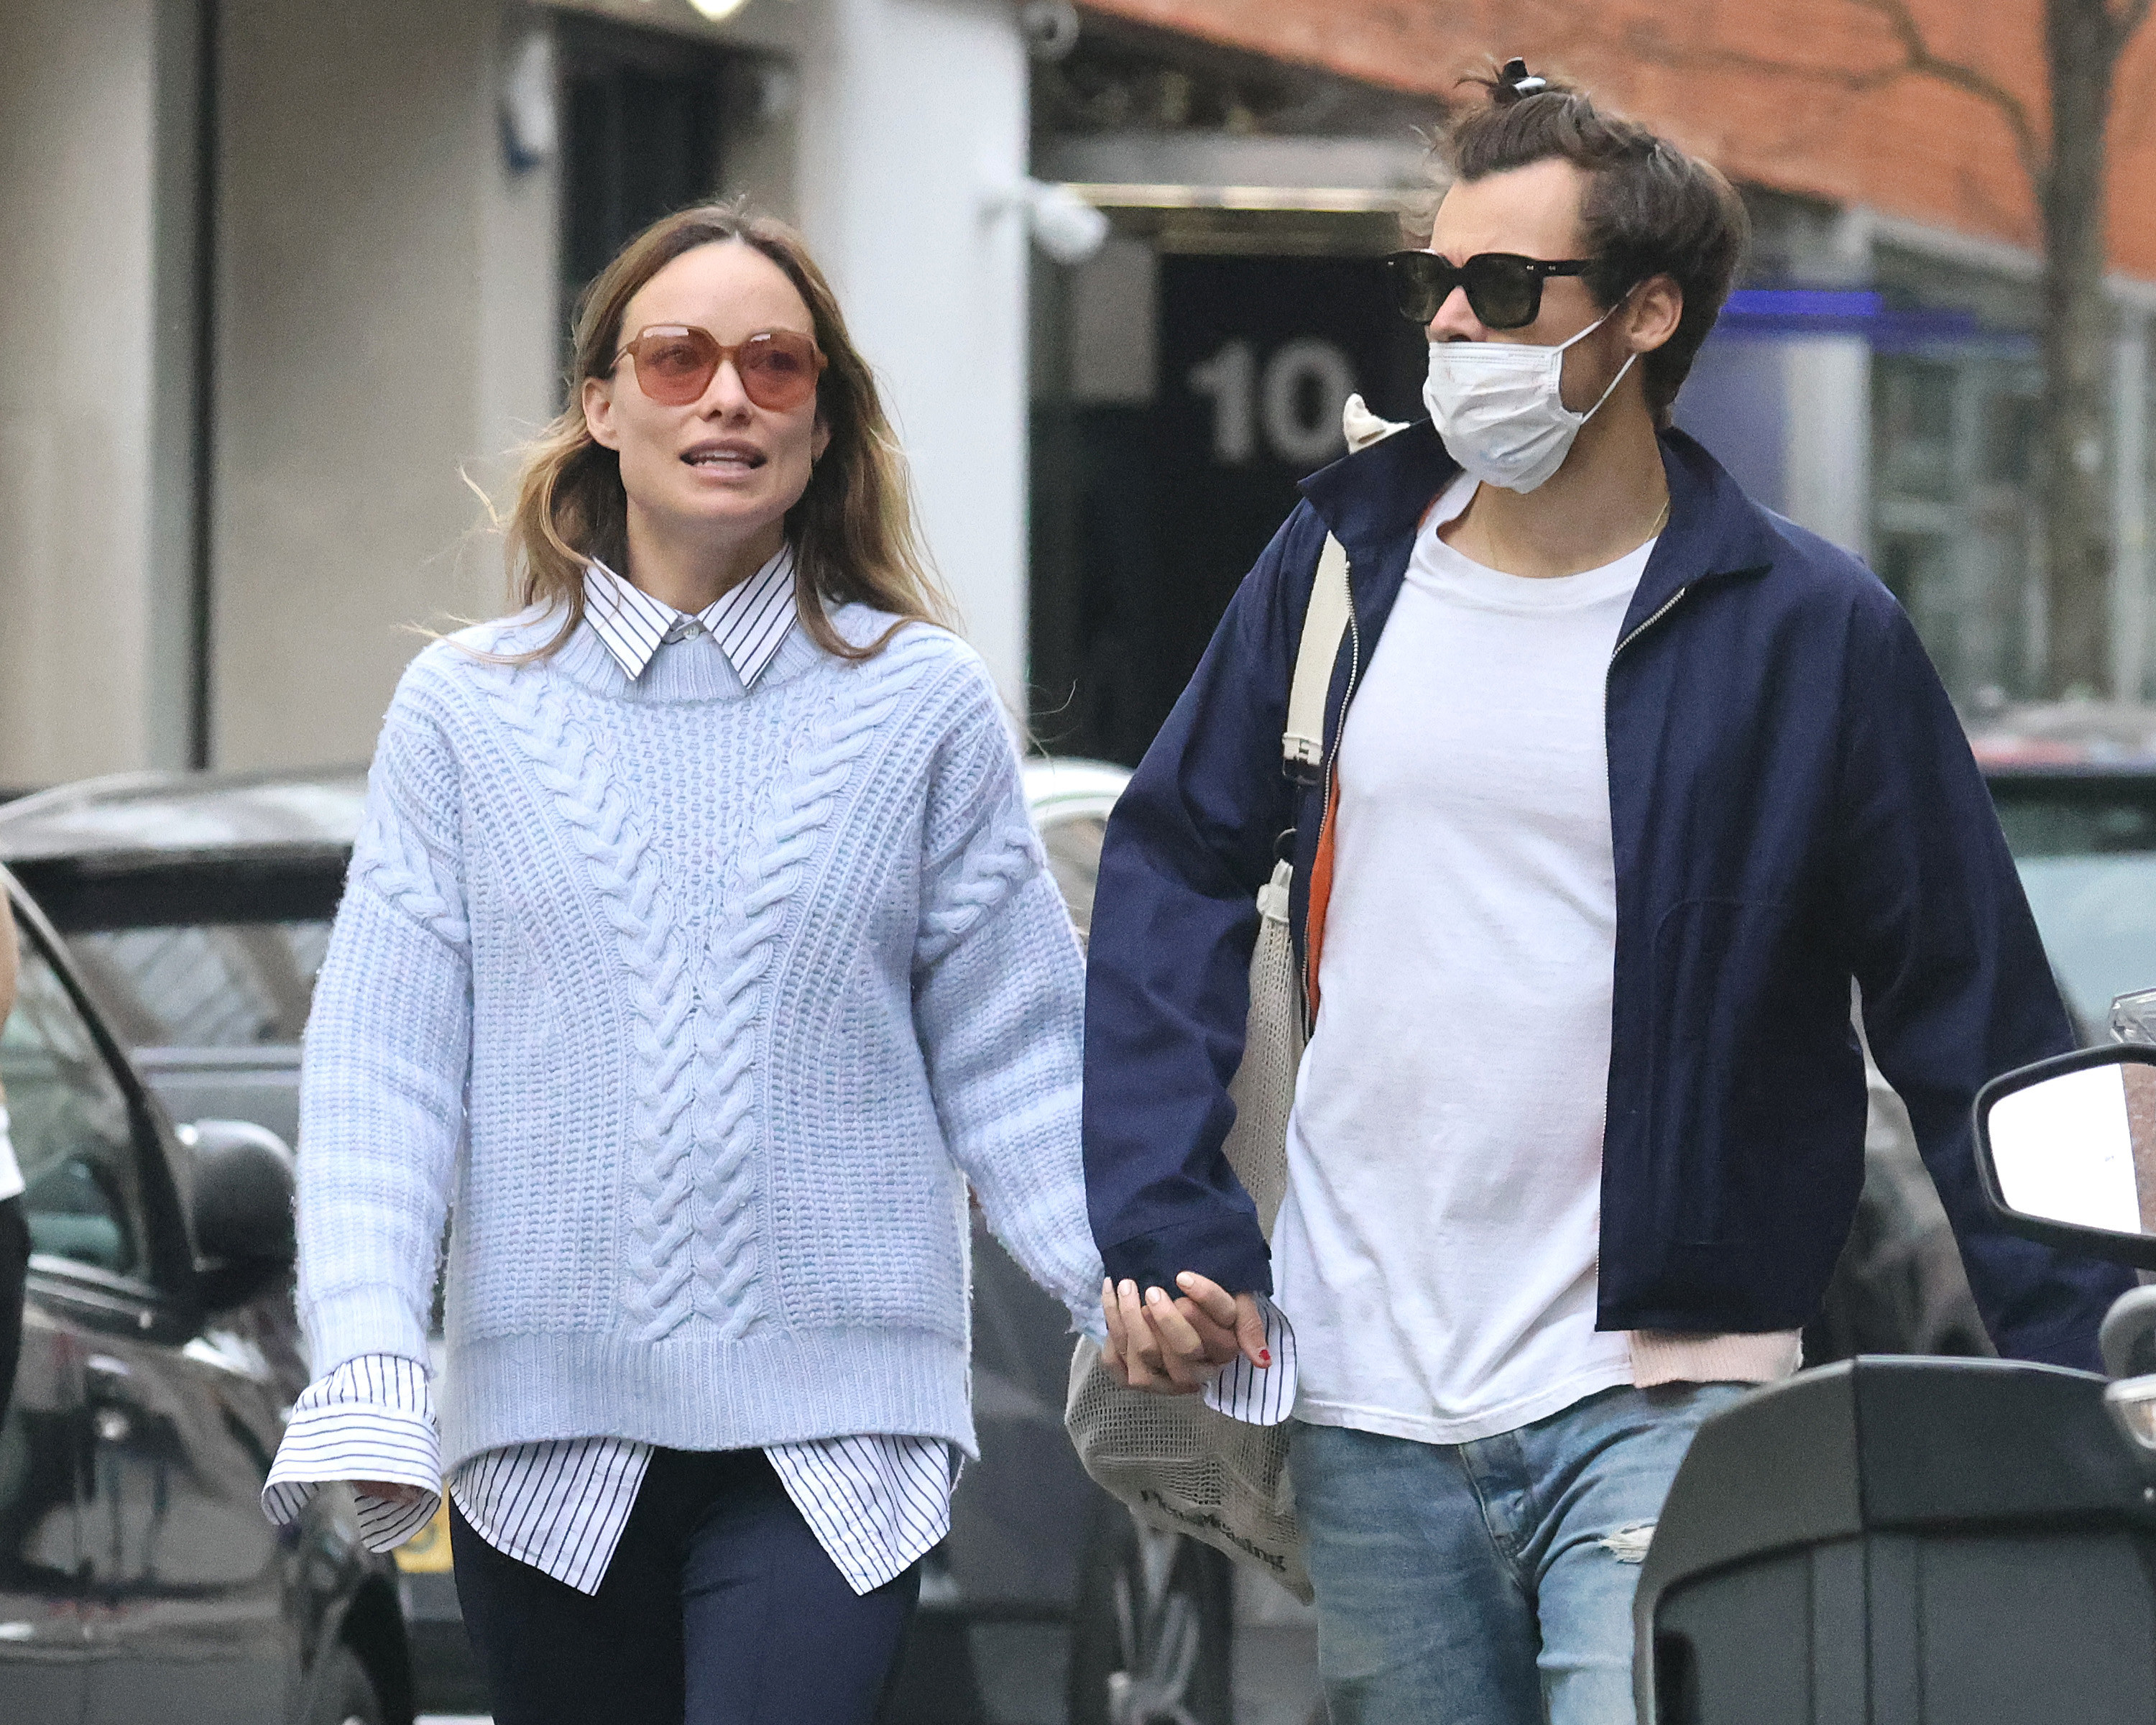 Harry and Olivia hold hands while walking